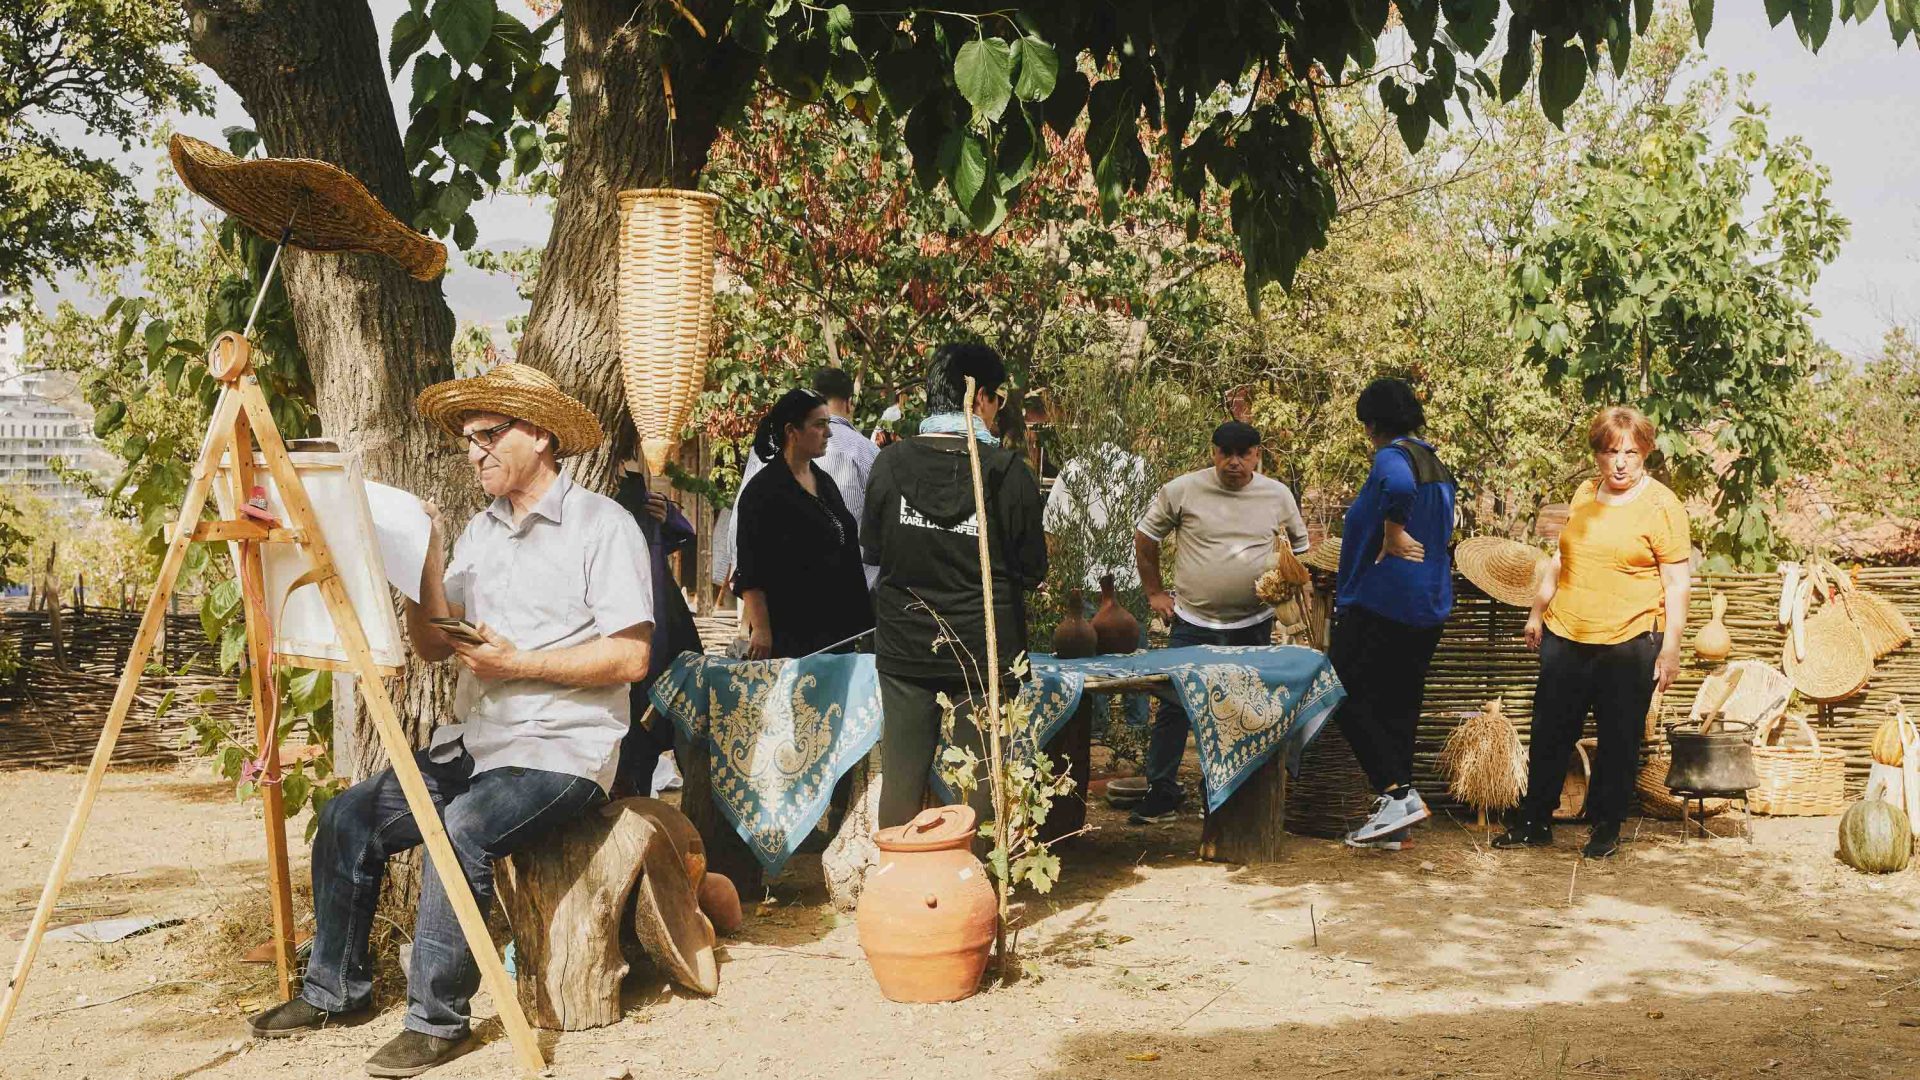 A musician plays while people sit under a tree.